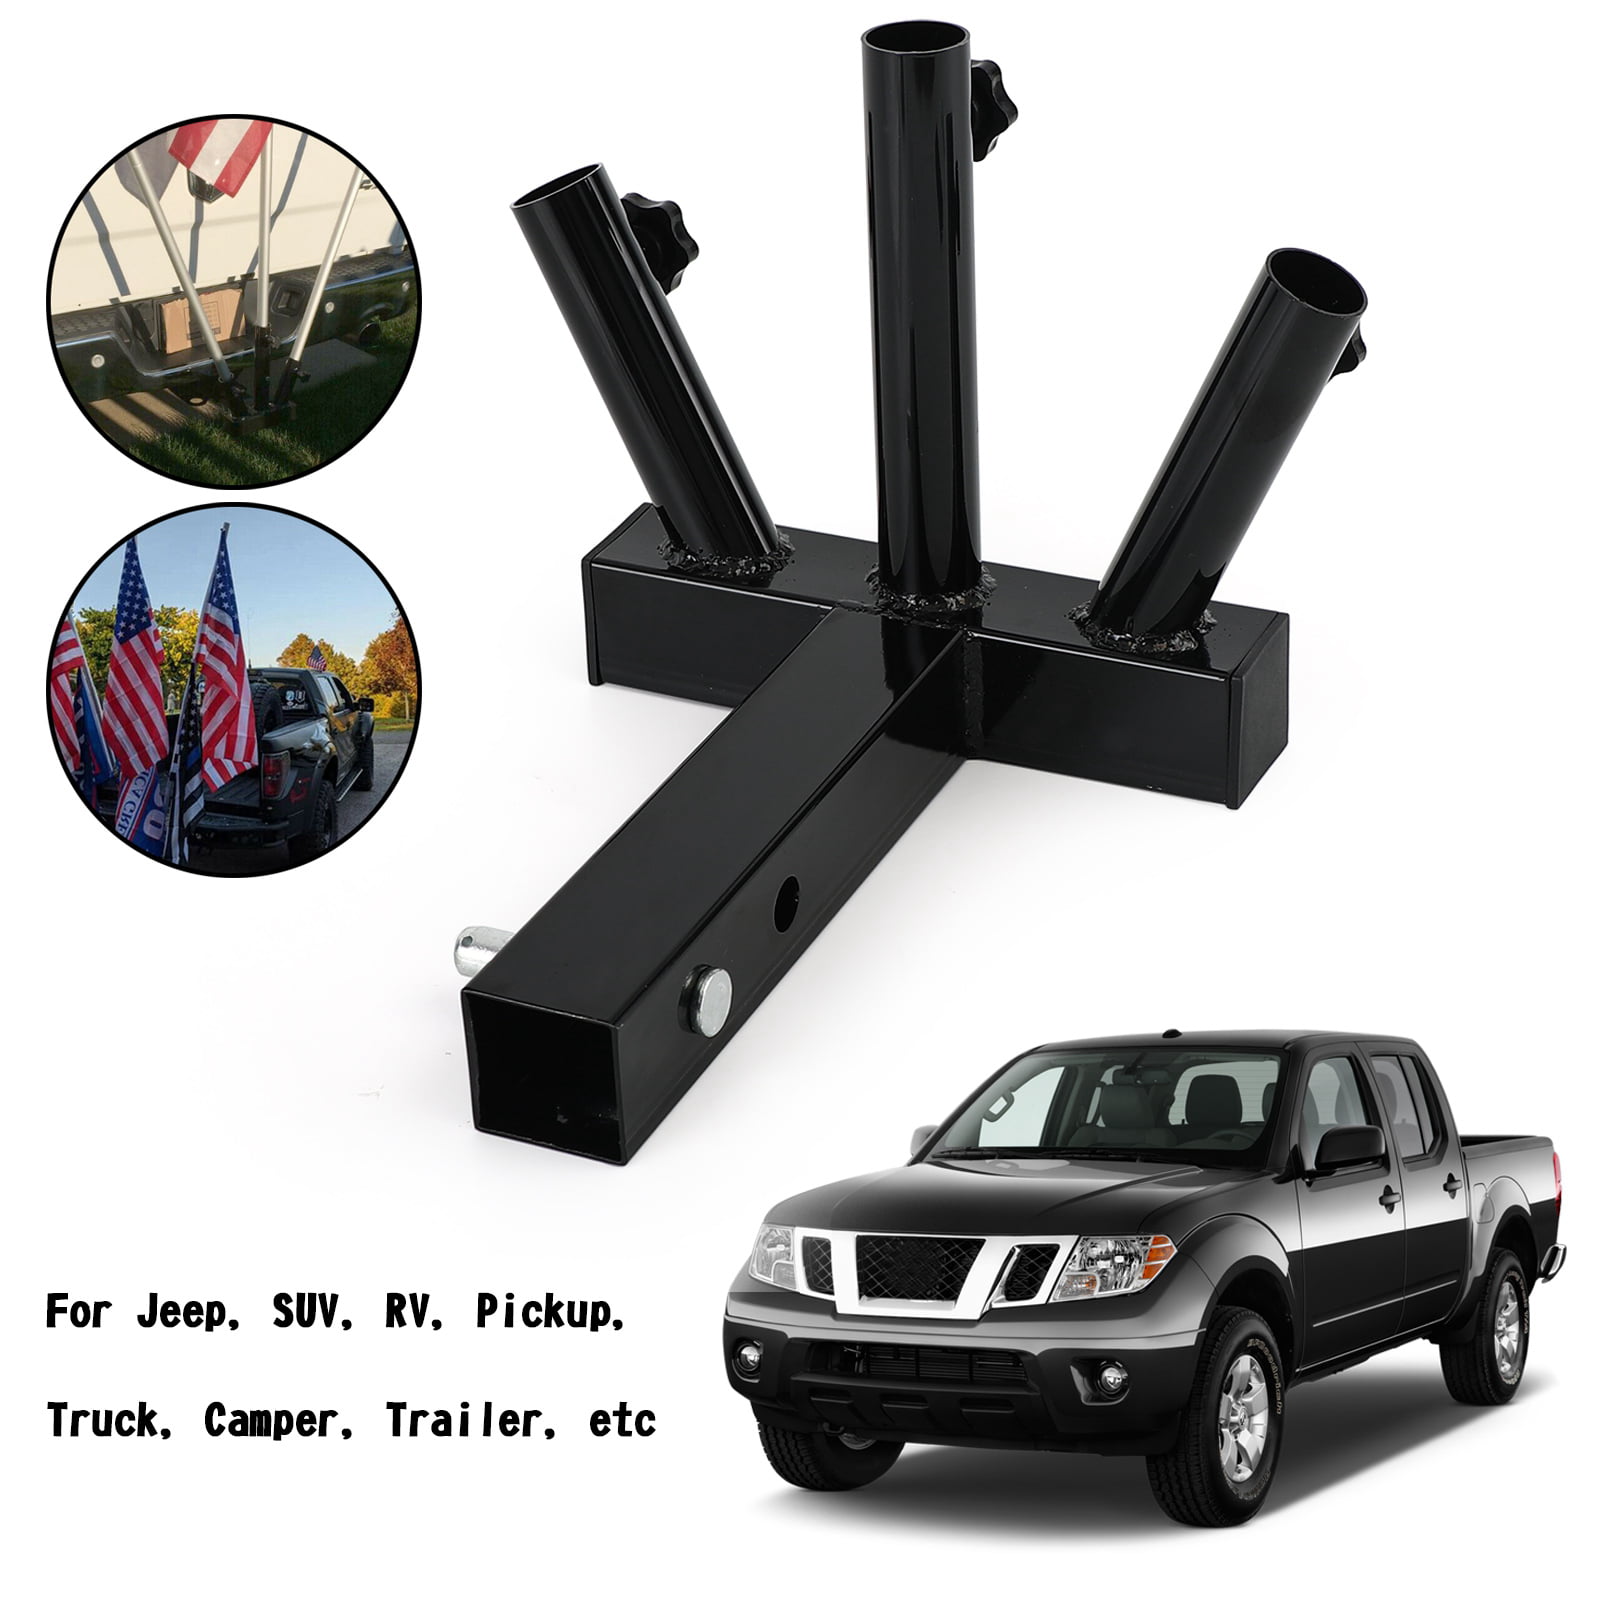 Pickup Truck Flag Pole Mount for Trailer Truck Flag Pole Mount Hitch Flag Pole Holder Heavy Duty Car Flag Mount for Any Vehicle with Standard 2 Hitch Receiver Car 